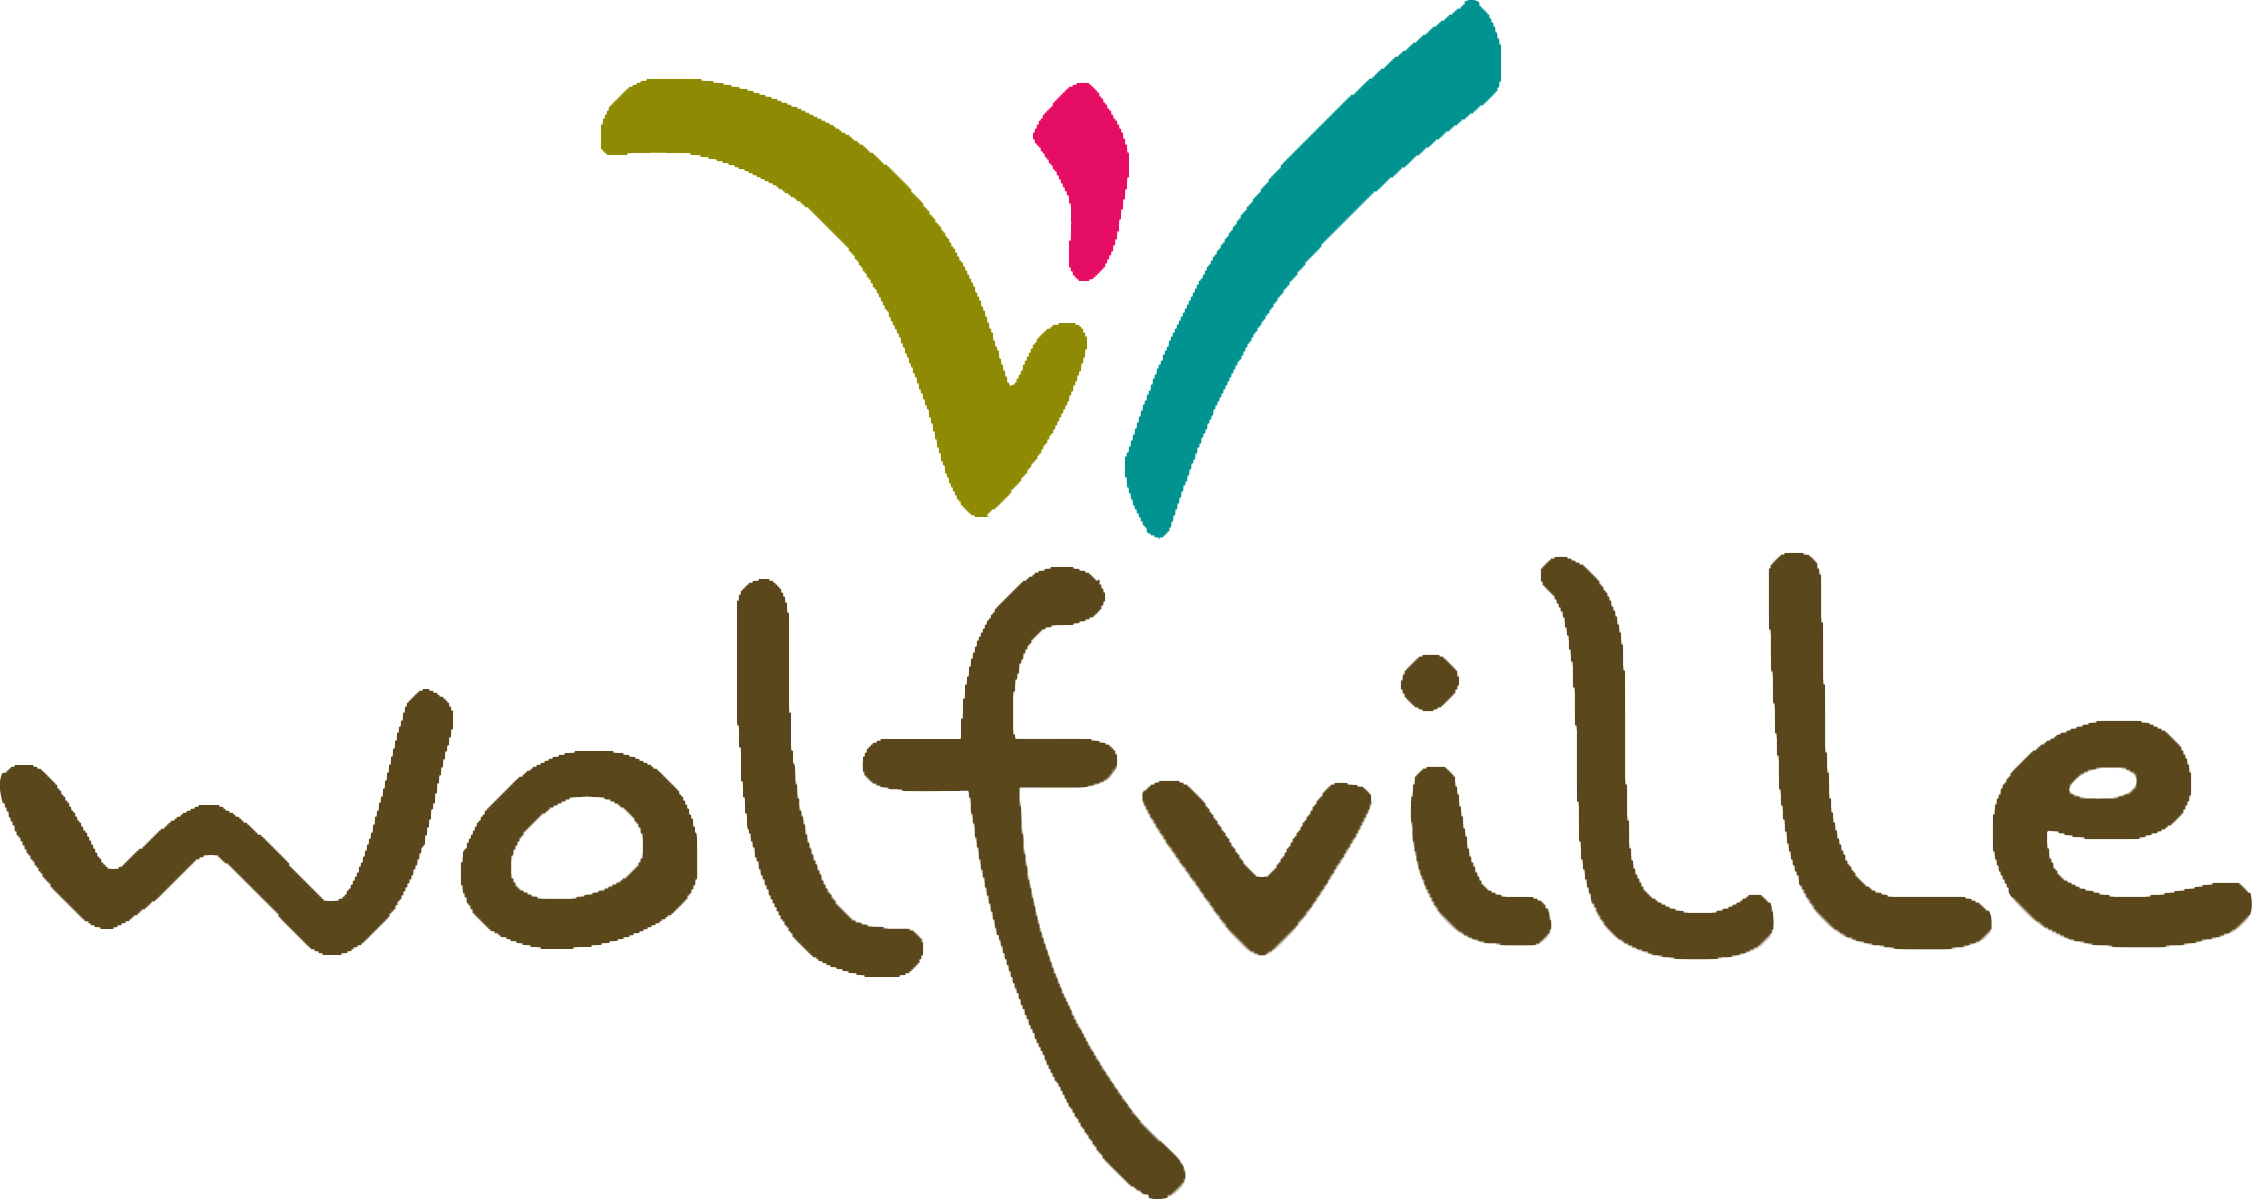 Town of Wolfville logo